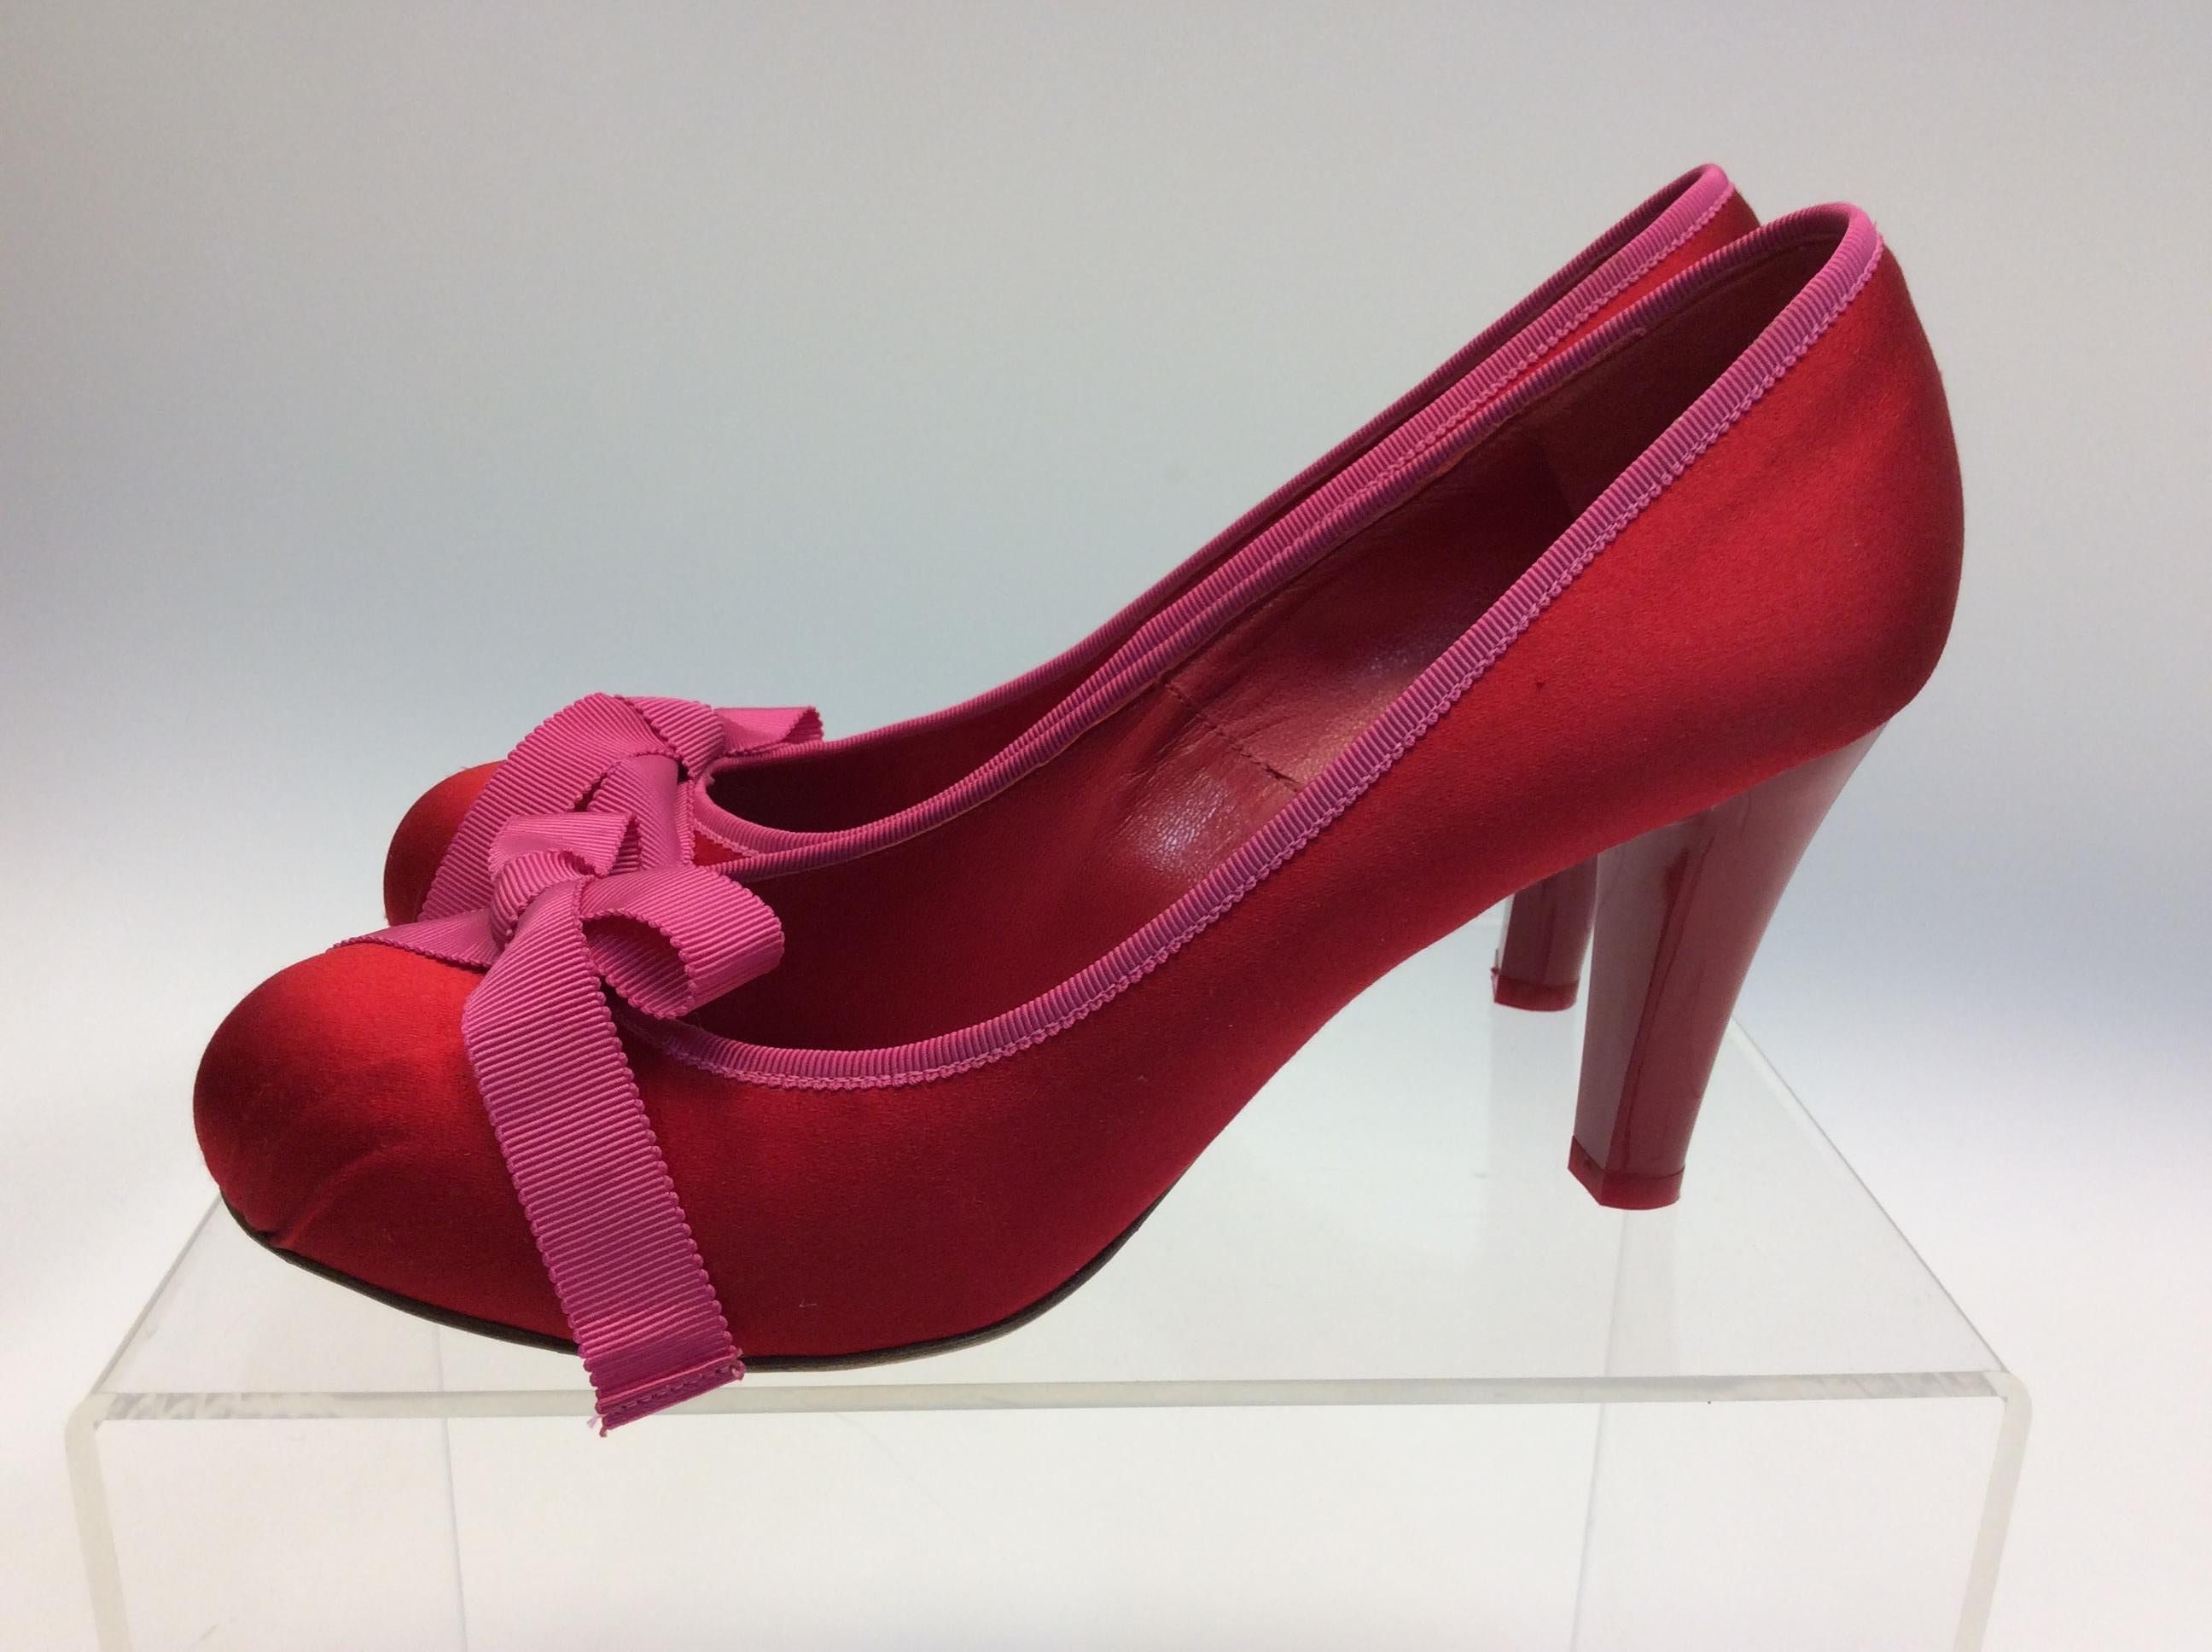 Marc Jacobs Red and Pink Satin Bow Heels
$199
Made in Italy
Size 39.5
3